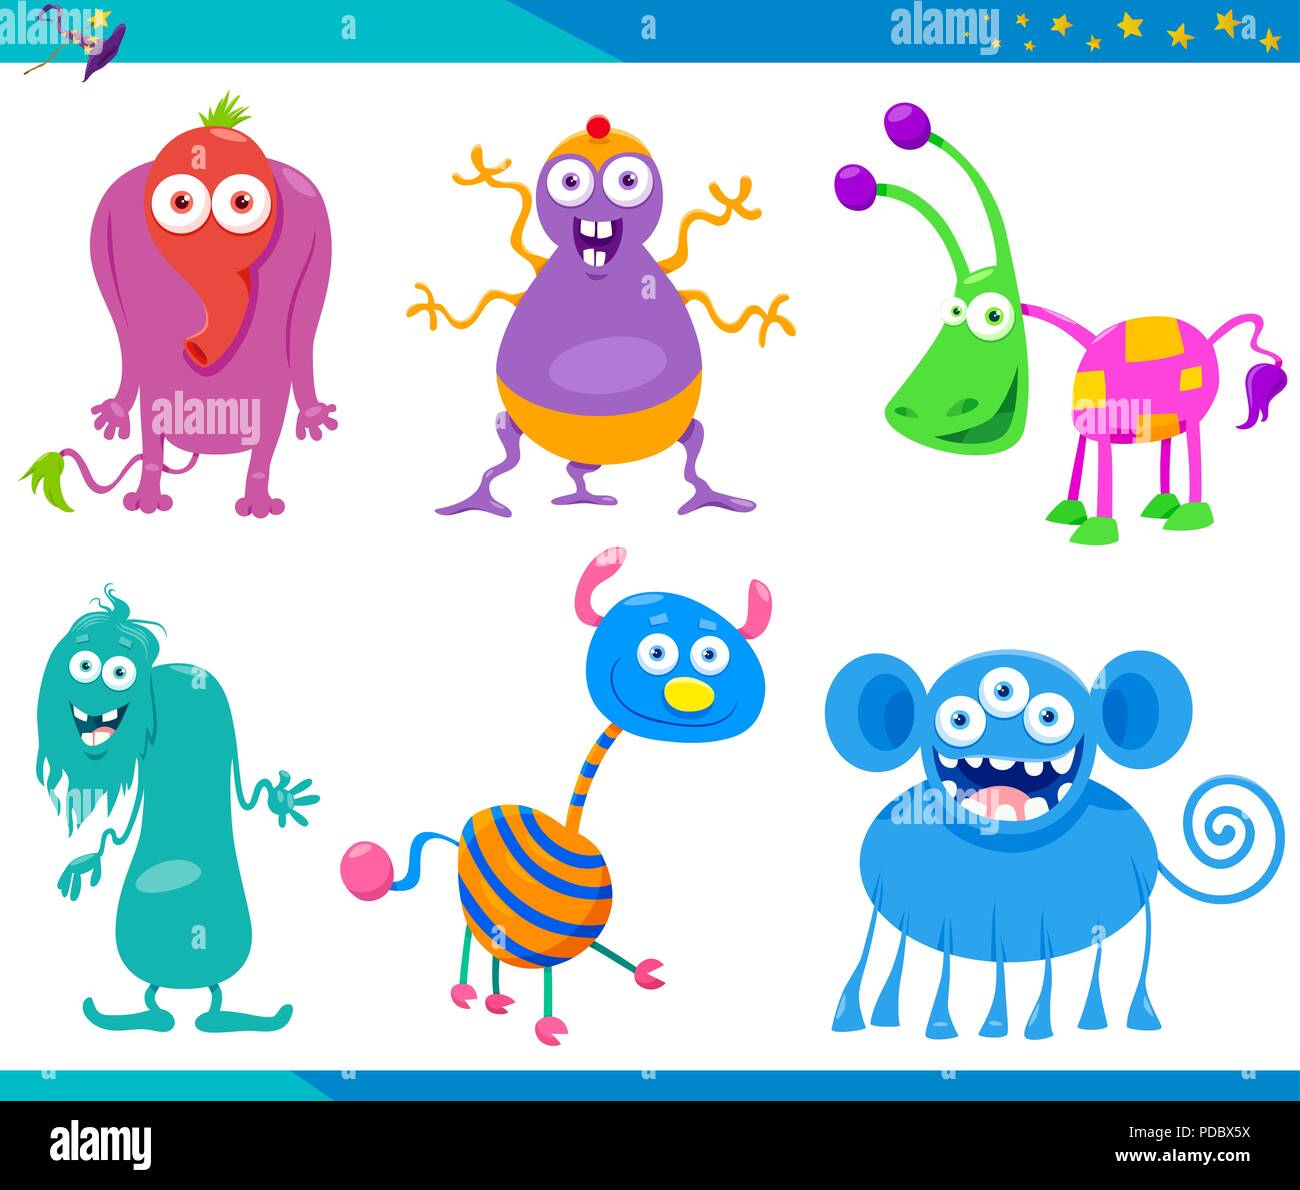 Cartoon Illustrations of Funny Fantasy Monsters or Frights Characters Set Stock Vector